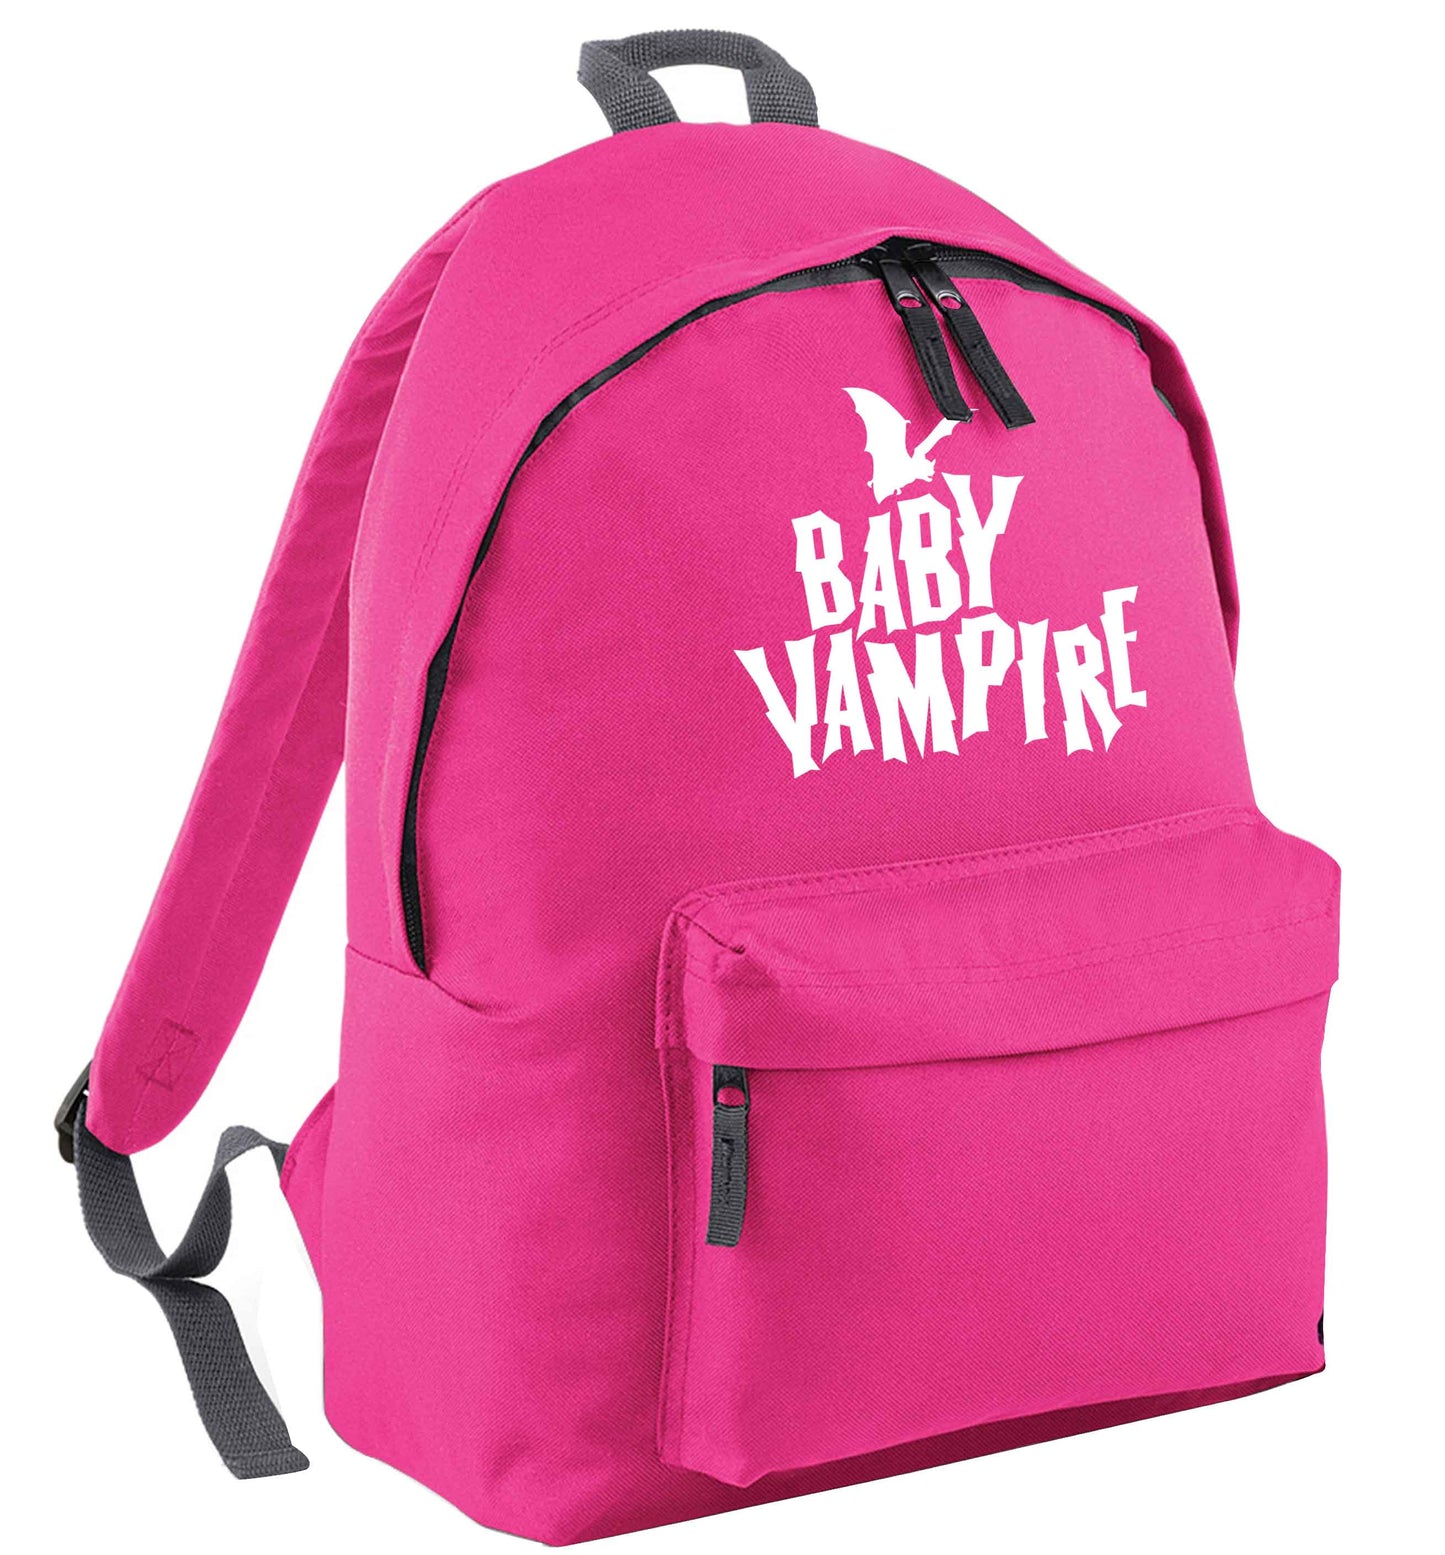 Baby vampire pink adults backpack